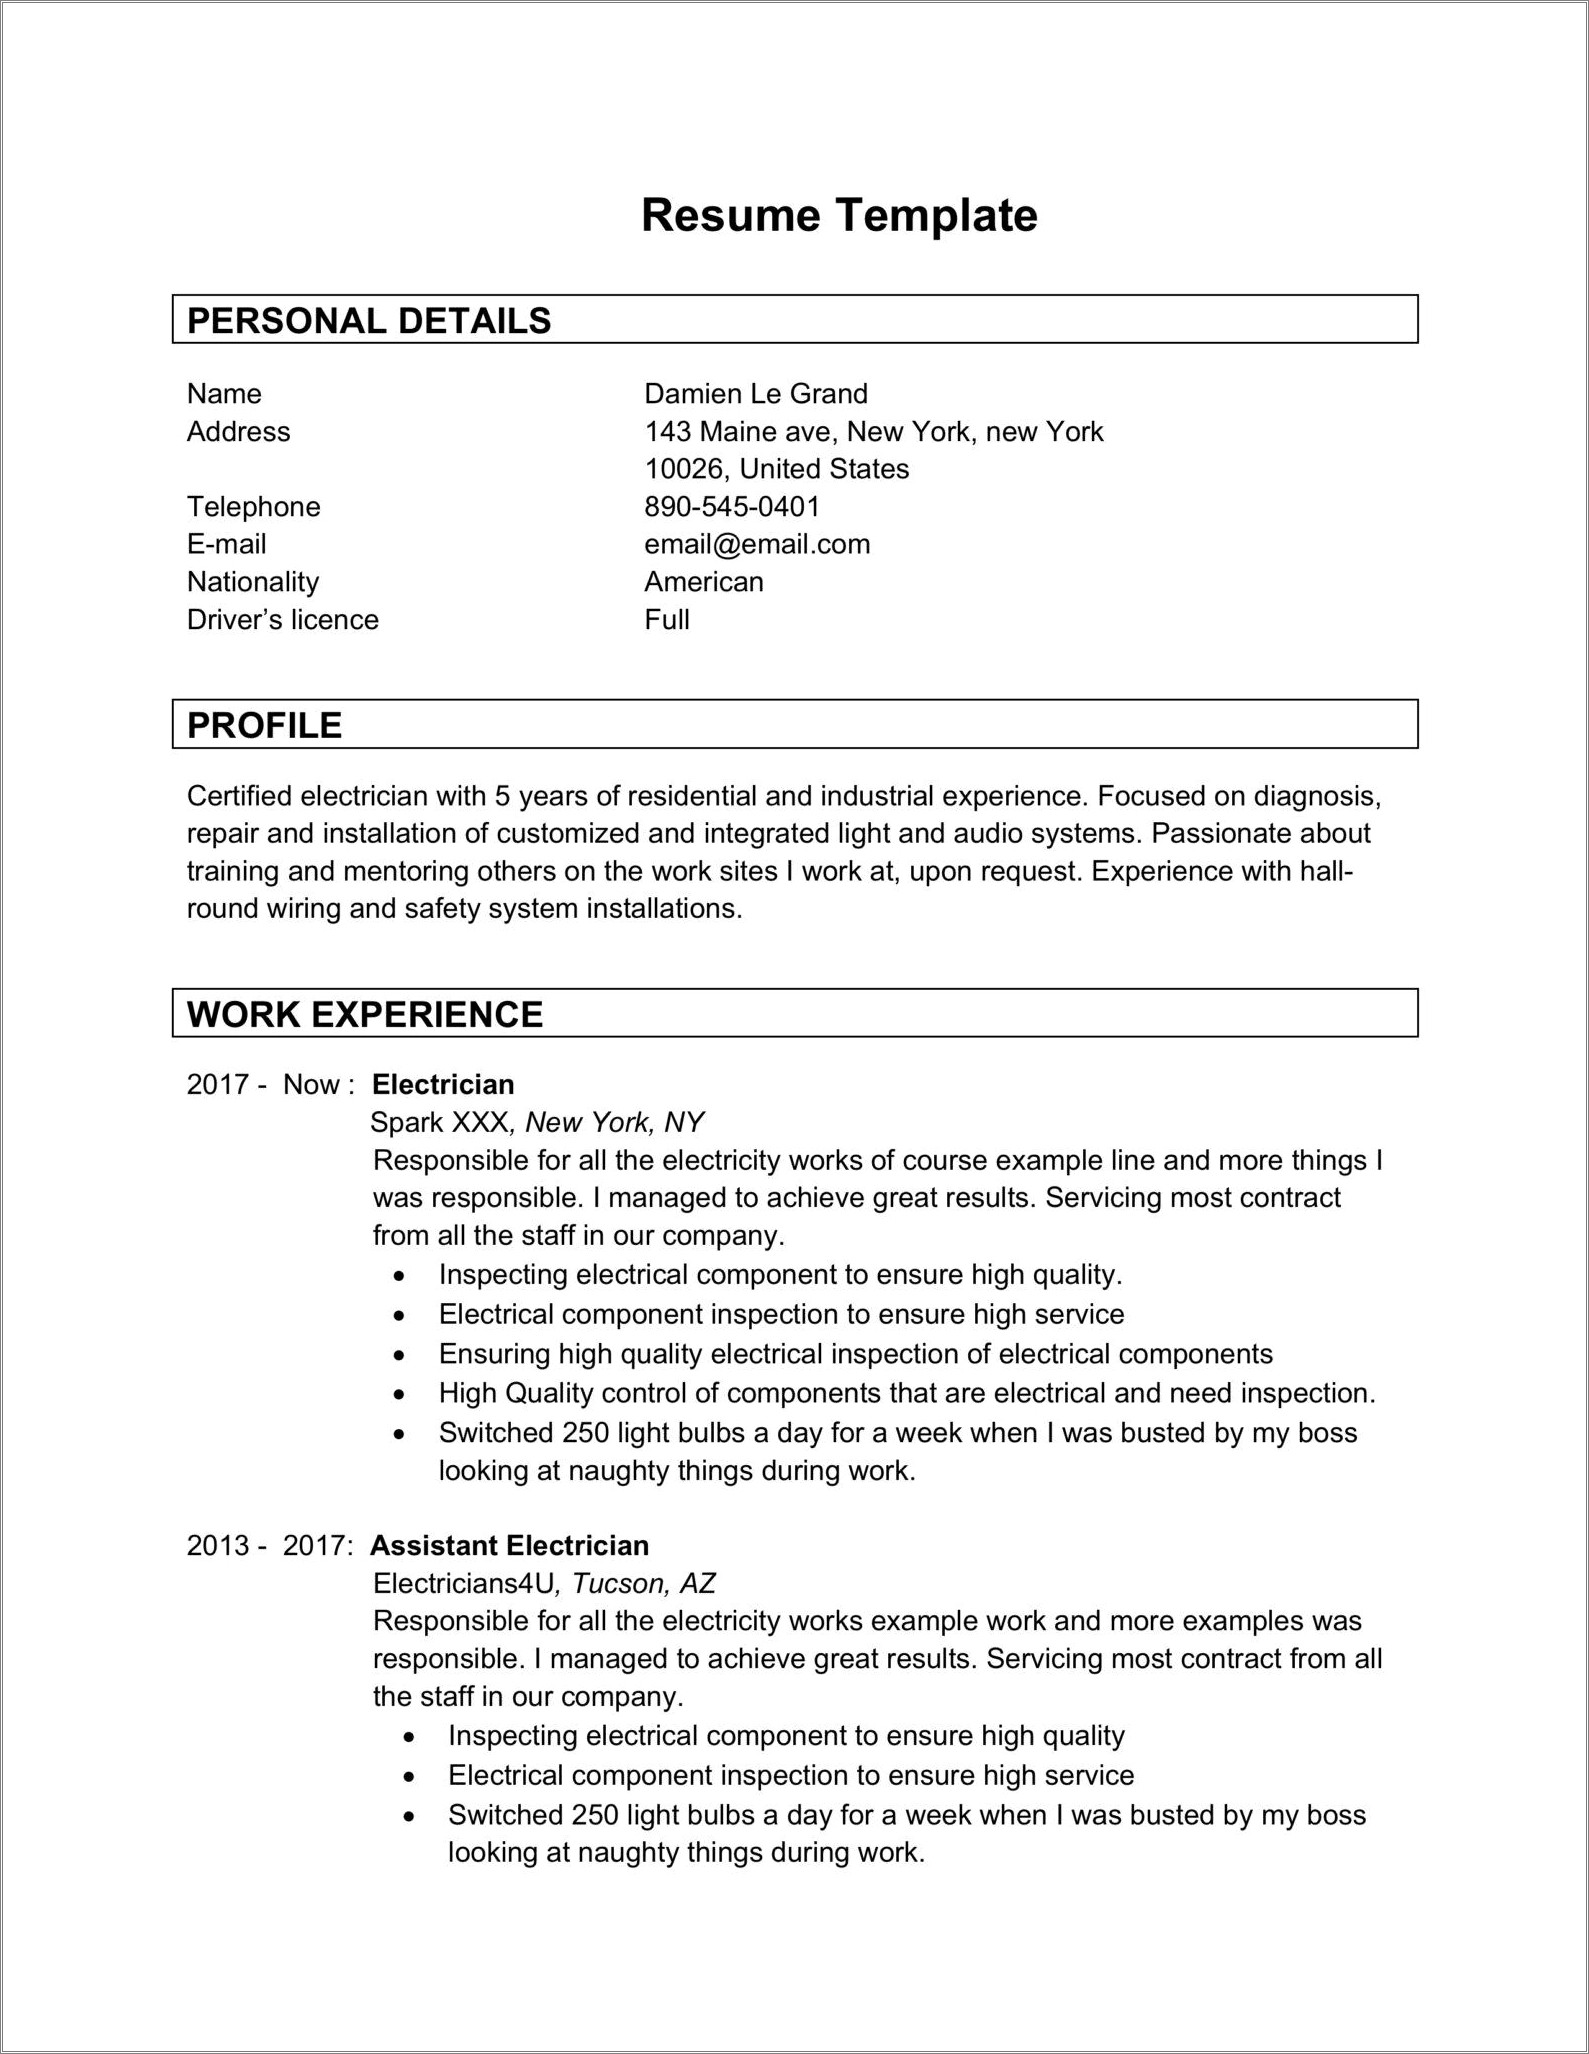 cv-templates-word-2013-free-download-resume-example-gallery